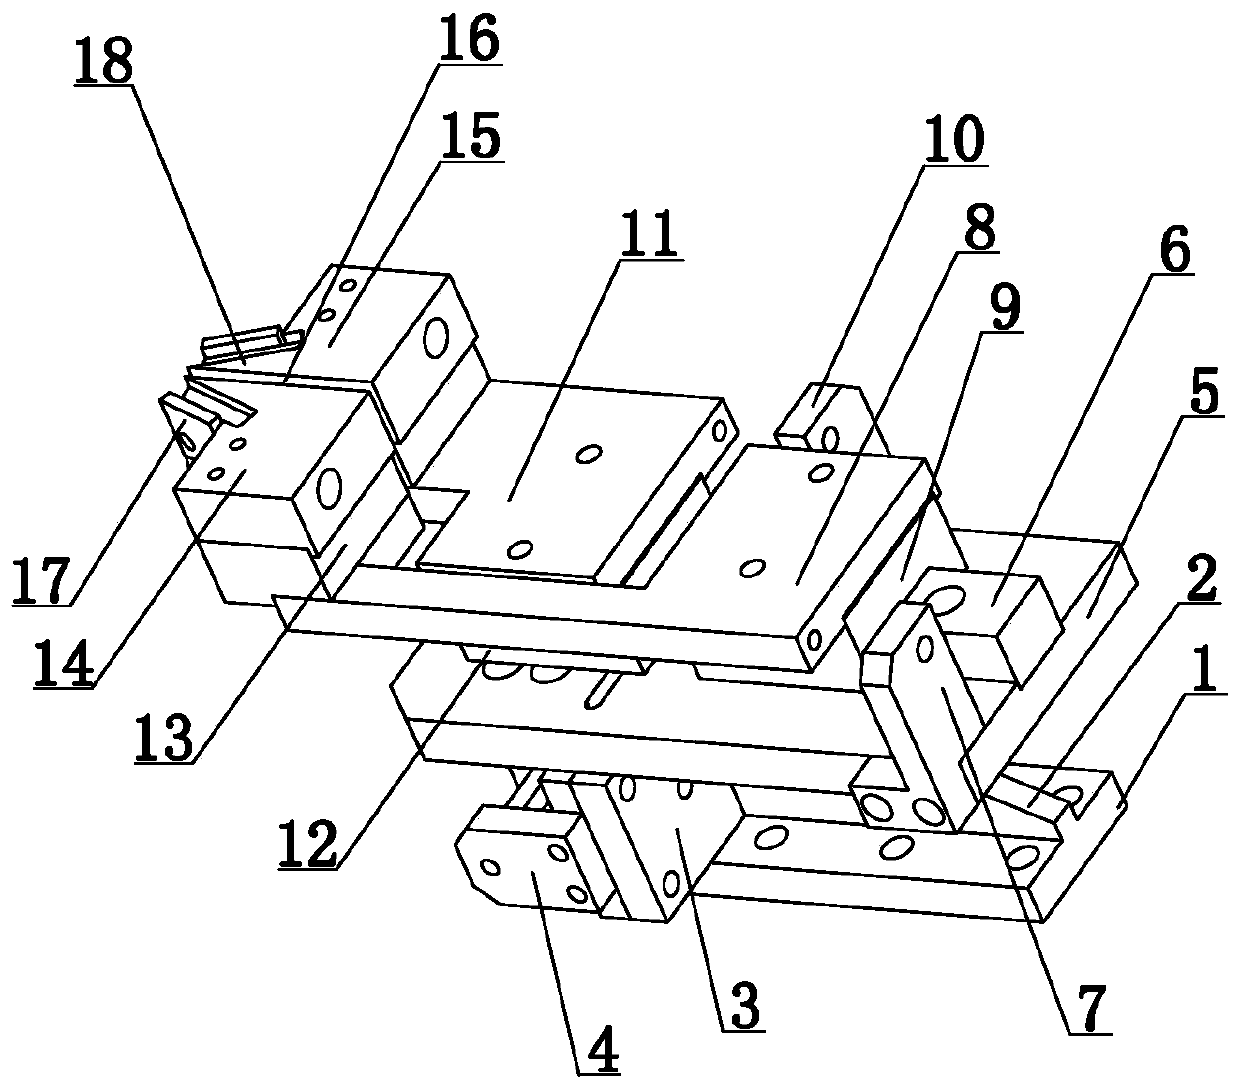 Paper cutting blade clamping device for numerical control machine tool